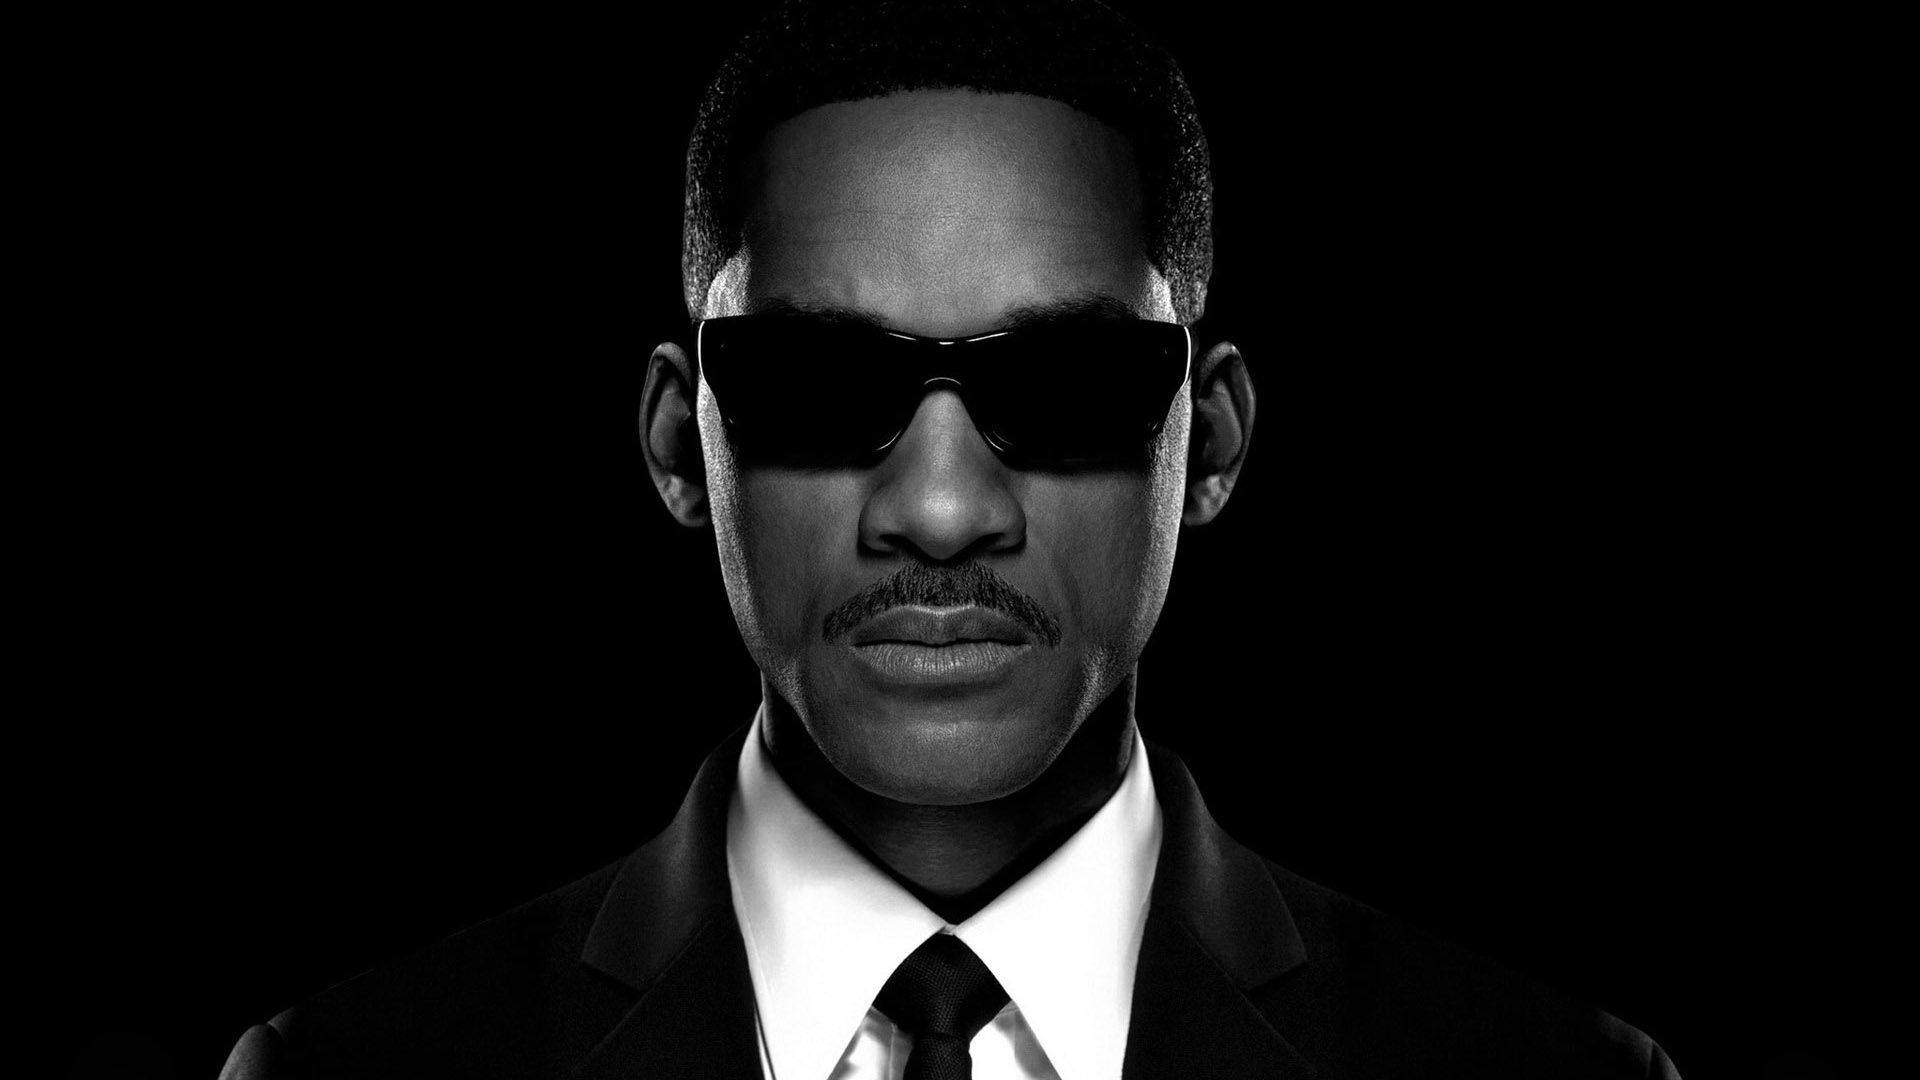 Will Smith: Chris Gardner in The Pursuit of Happiness, Monochrome. 1920x1080 Full HD Wallpaper.